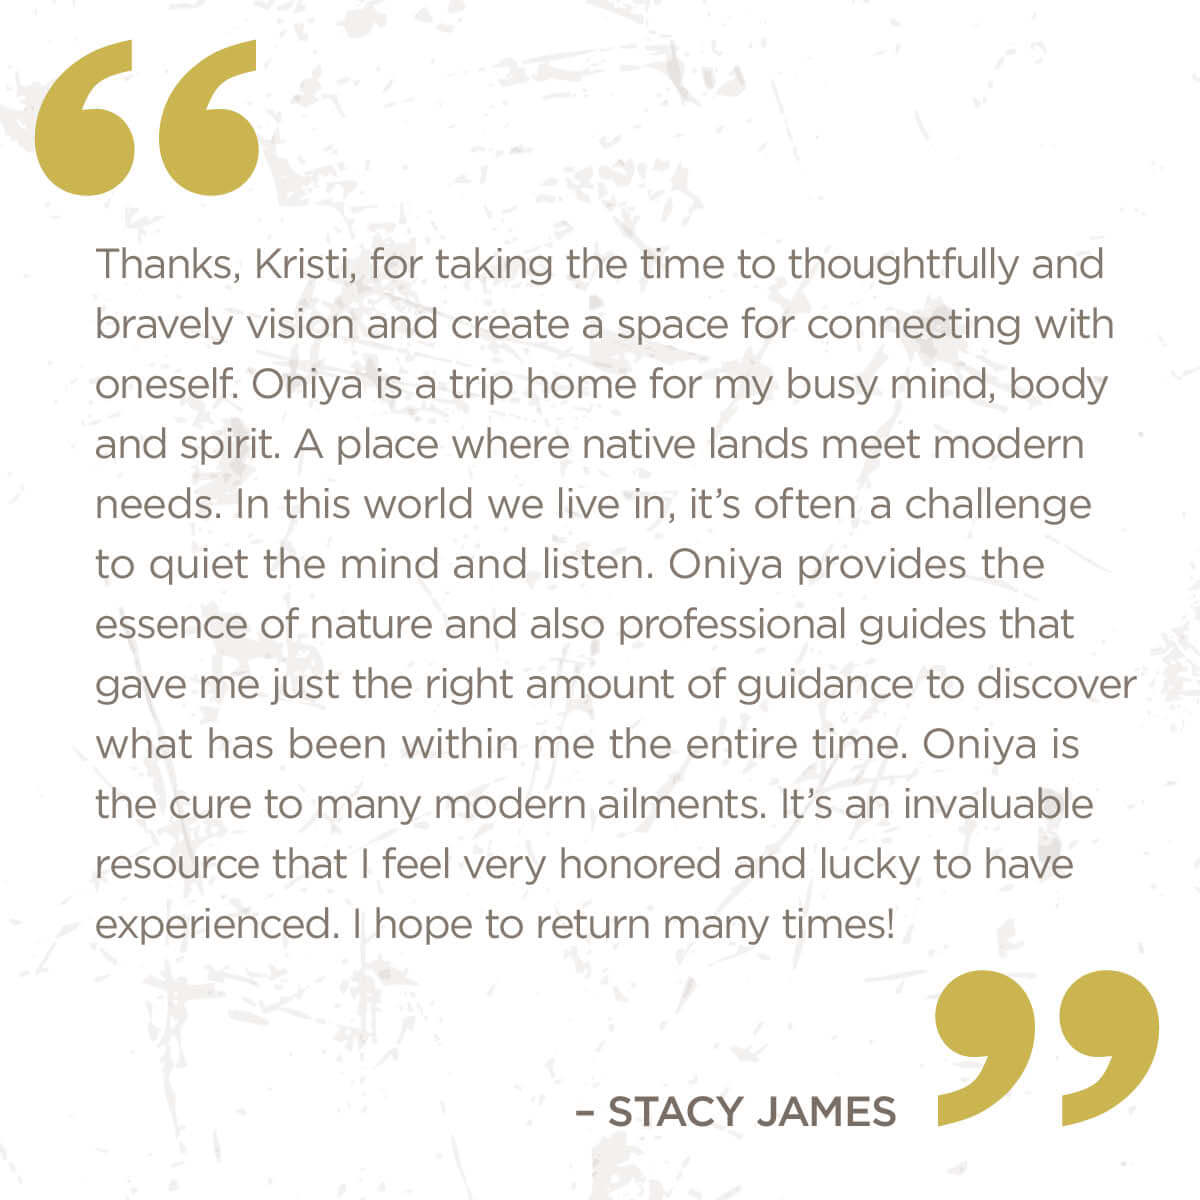 Thanks Kristi, for taking the time to thoughtfully and bravely vision and create a space for connectin with oneself. ONiya is a trip home for my busy mind, body and spirit. A place where native lands meet modern needs.  